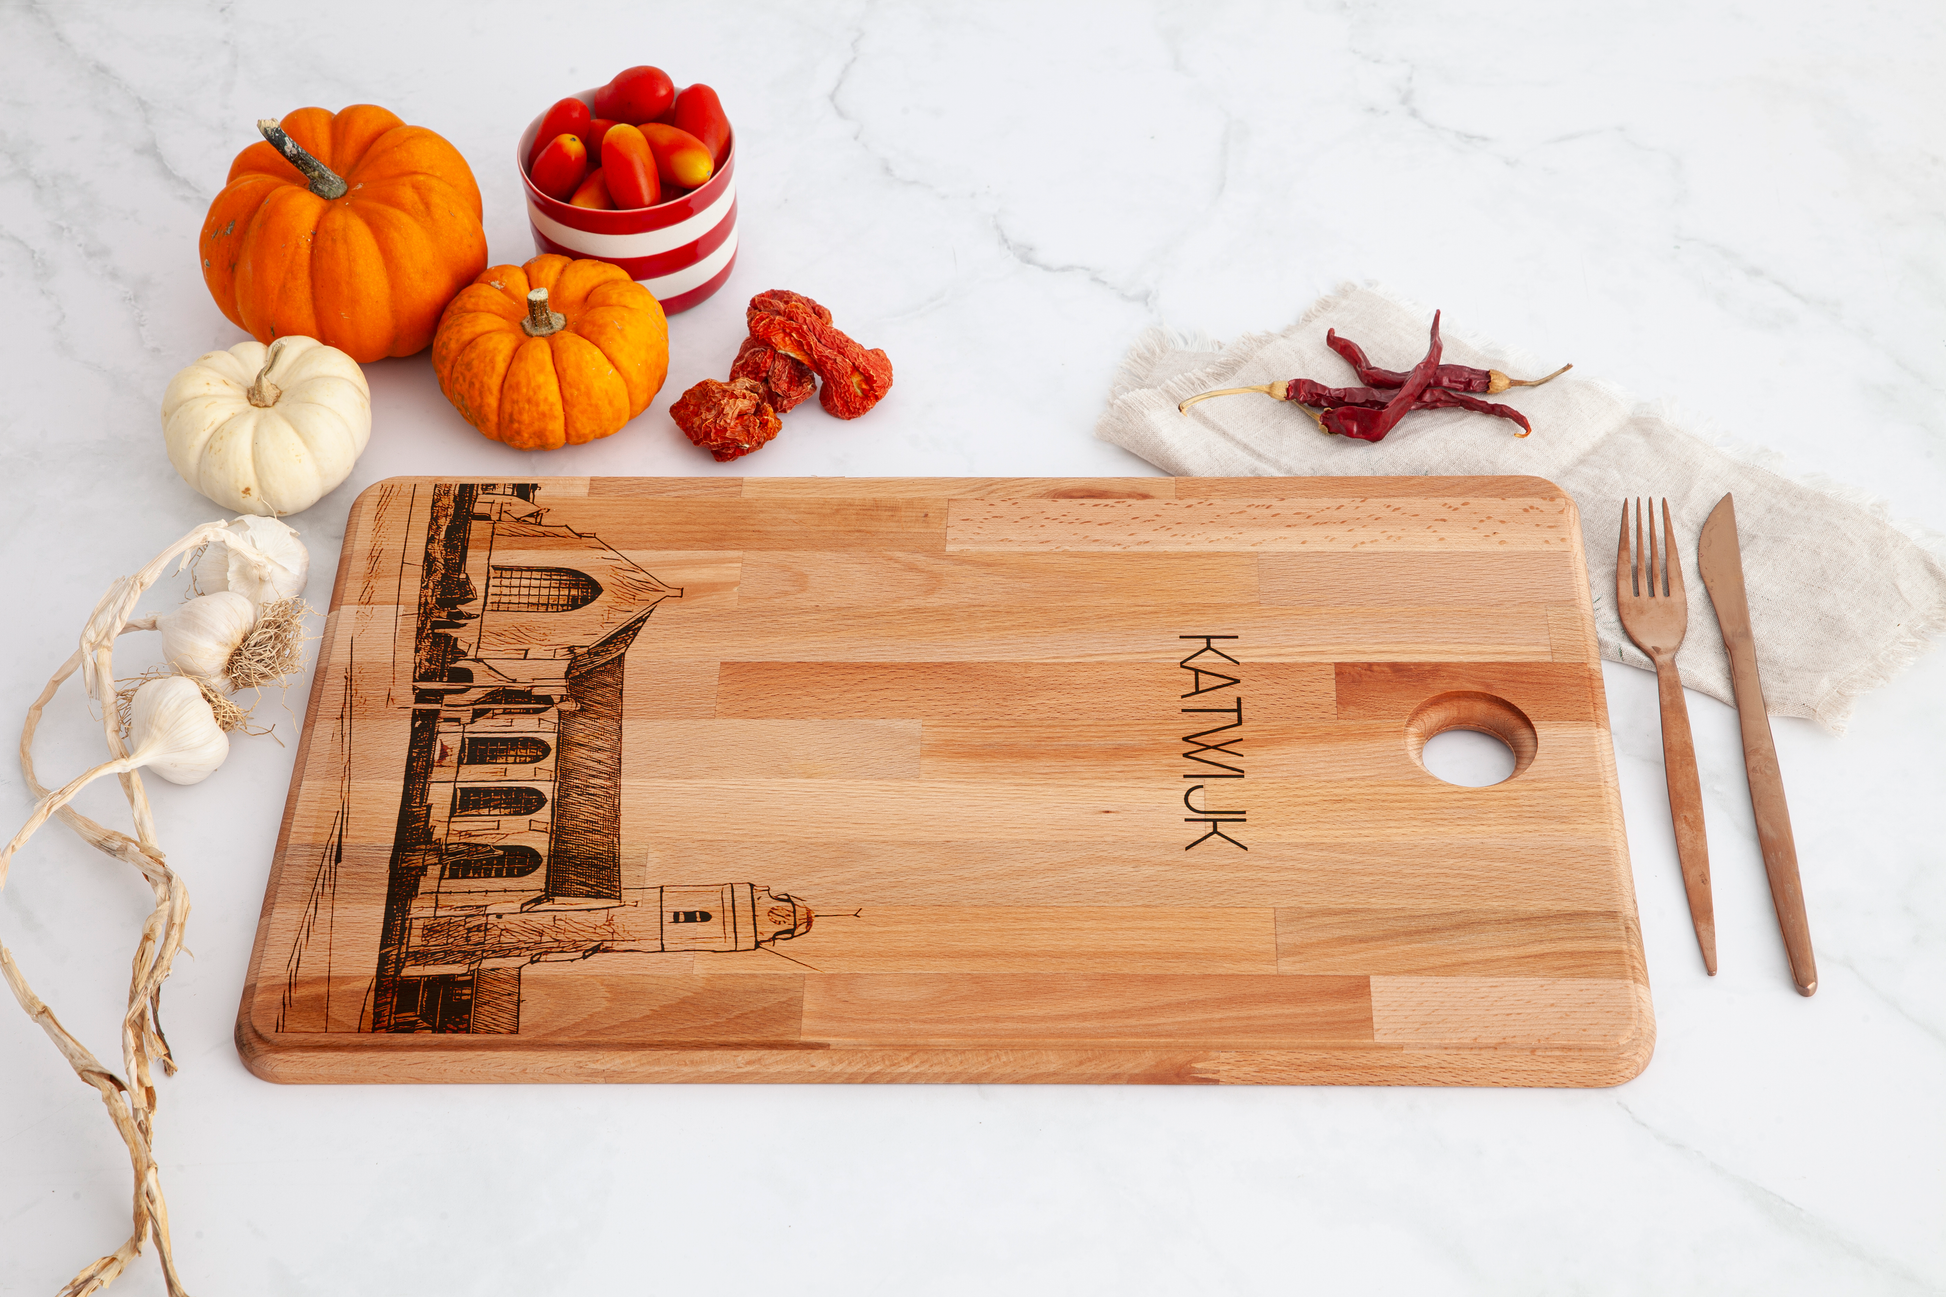 Katwijk, Andreaskerk, cutting board, with knife